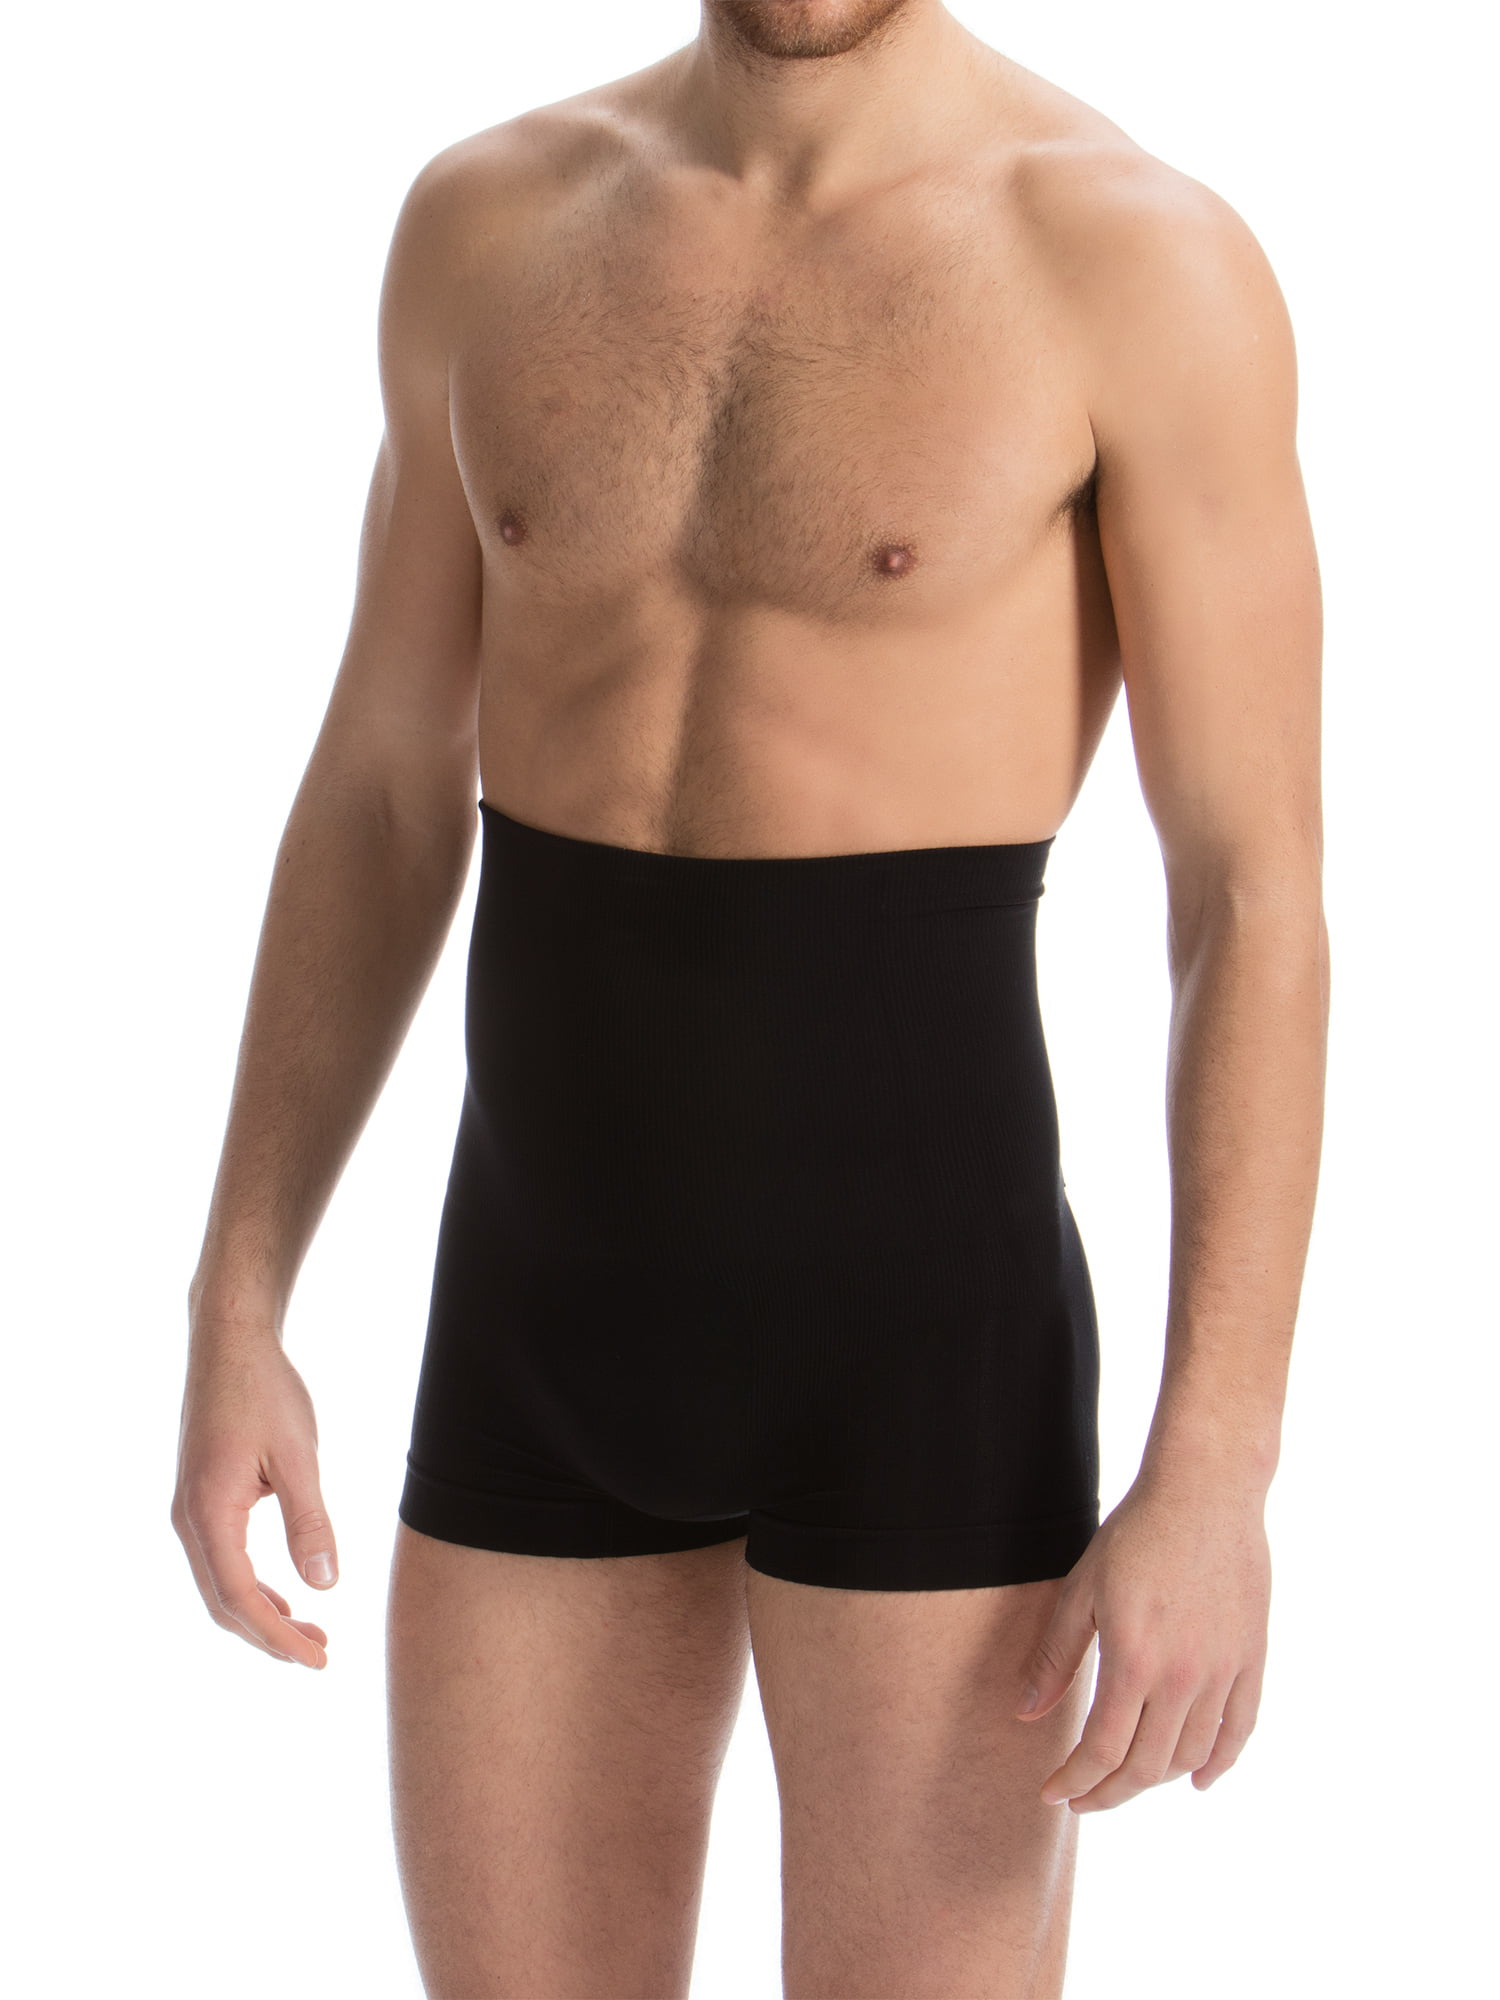 Positief wijn Rentmeester FarmaCell Man 402S (Black, L) Men's body shaping cotton boxers elastic  waistband back splints, 100% Made in Italy - Walmart.com